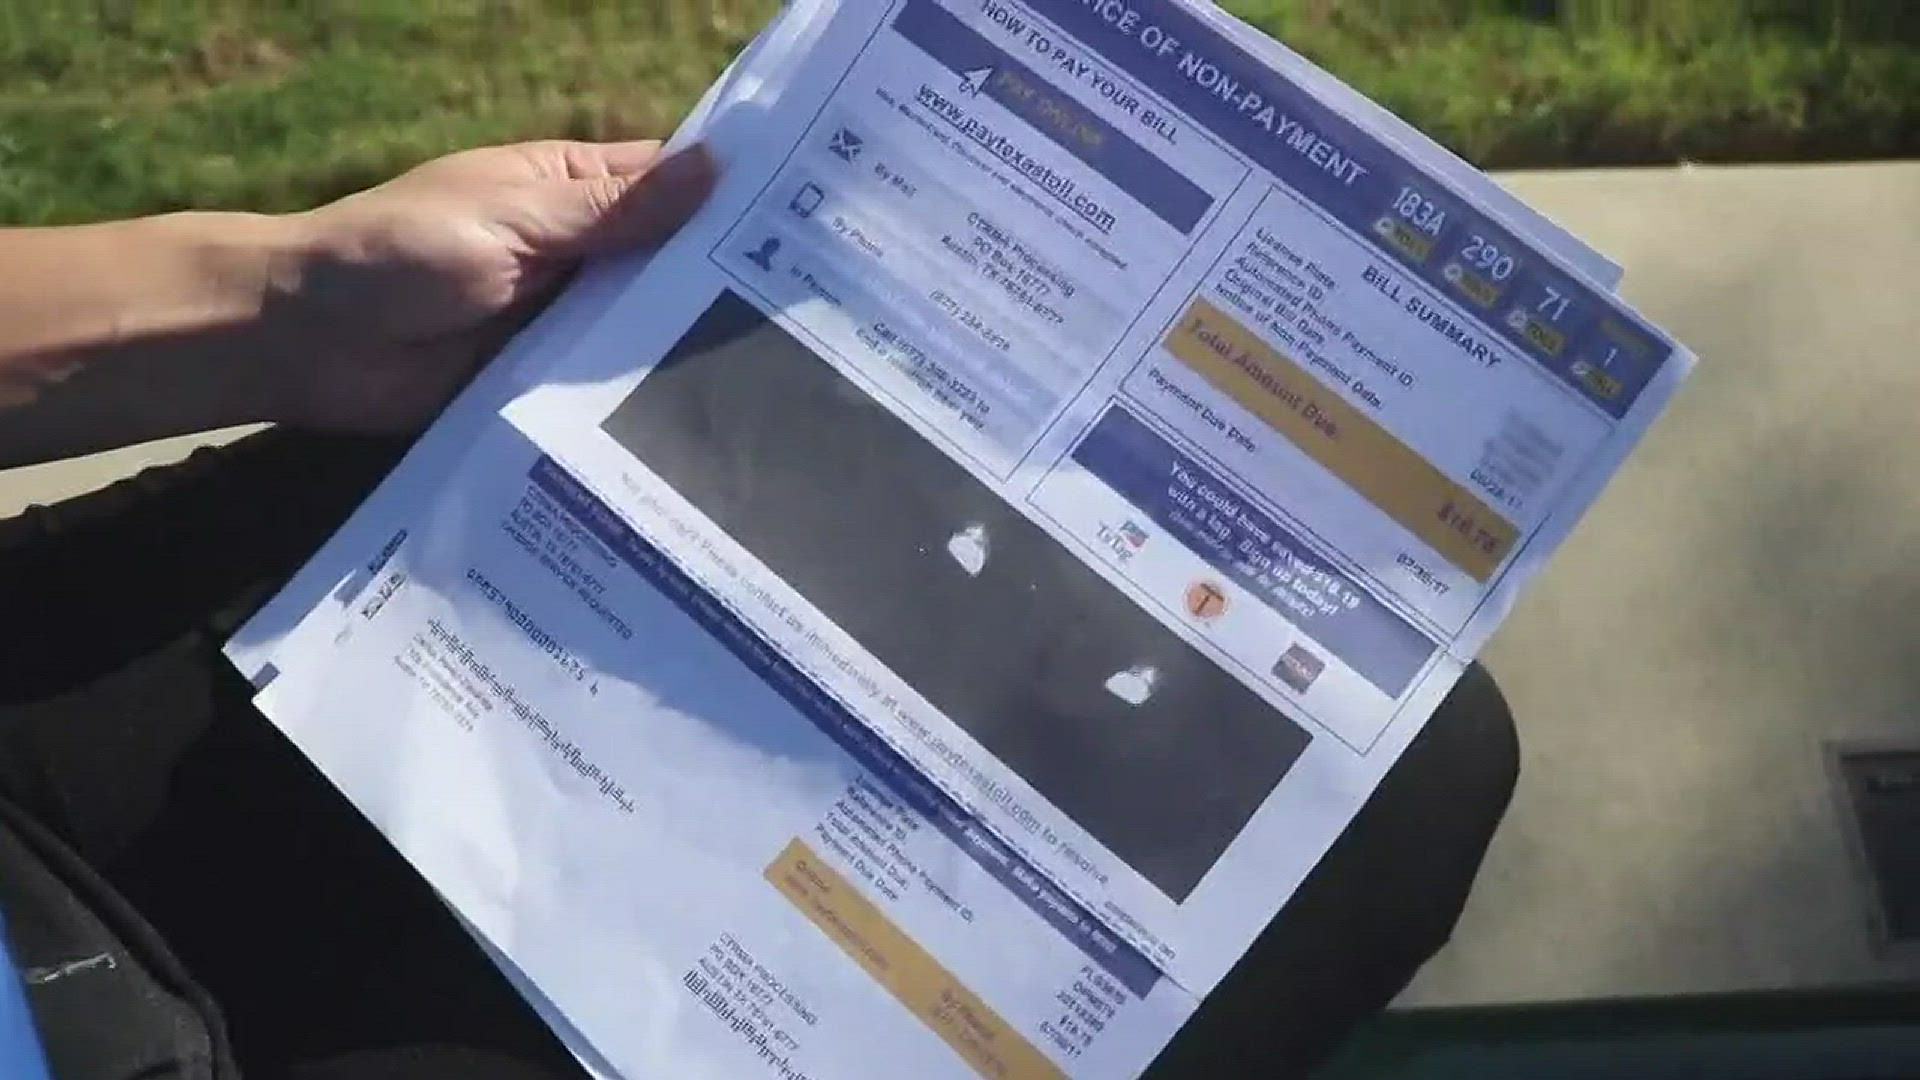 An Austin woman found errors with her Central Texas Regional Mobility Authority toll bill after questioning the bill's photo clarity.